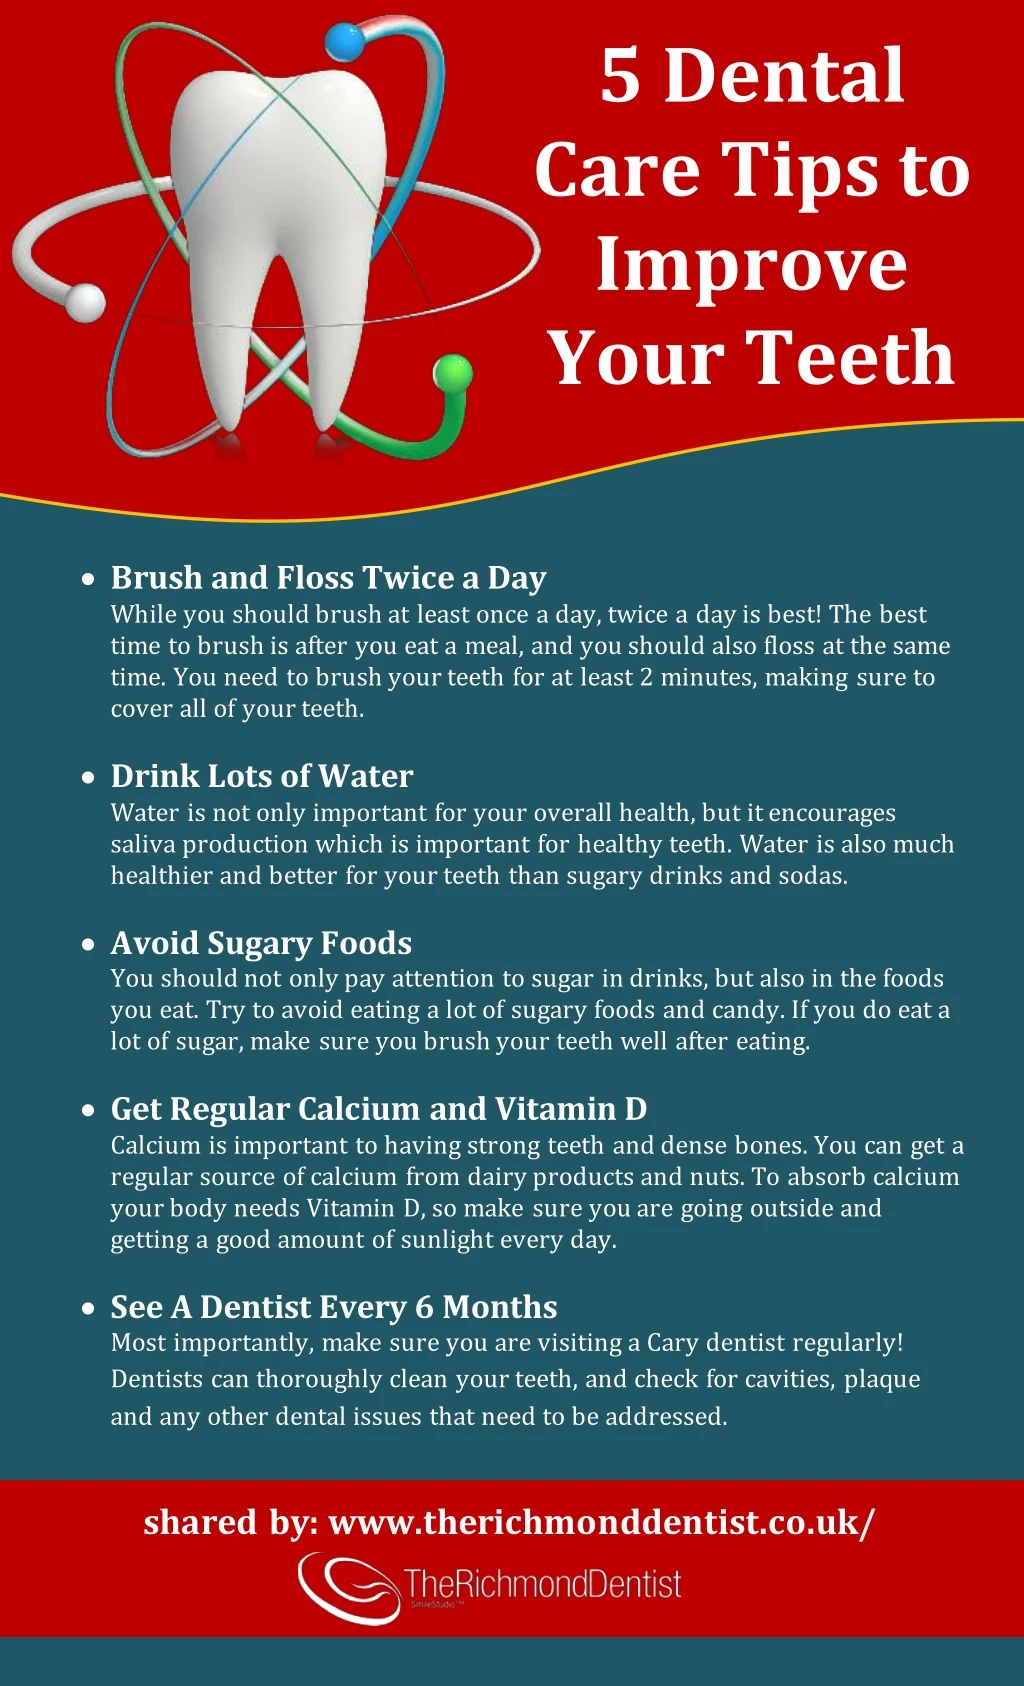 5 dental care tips to improve your teeth